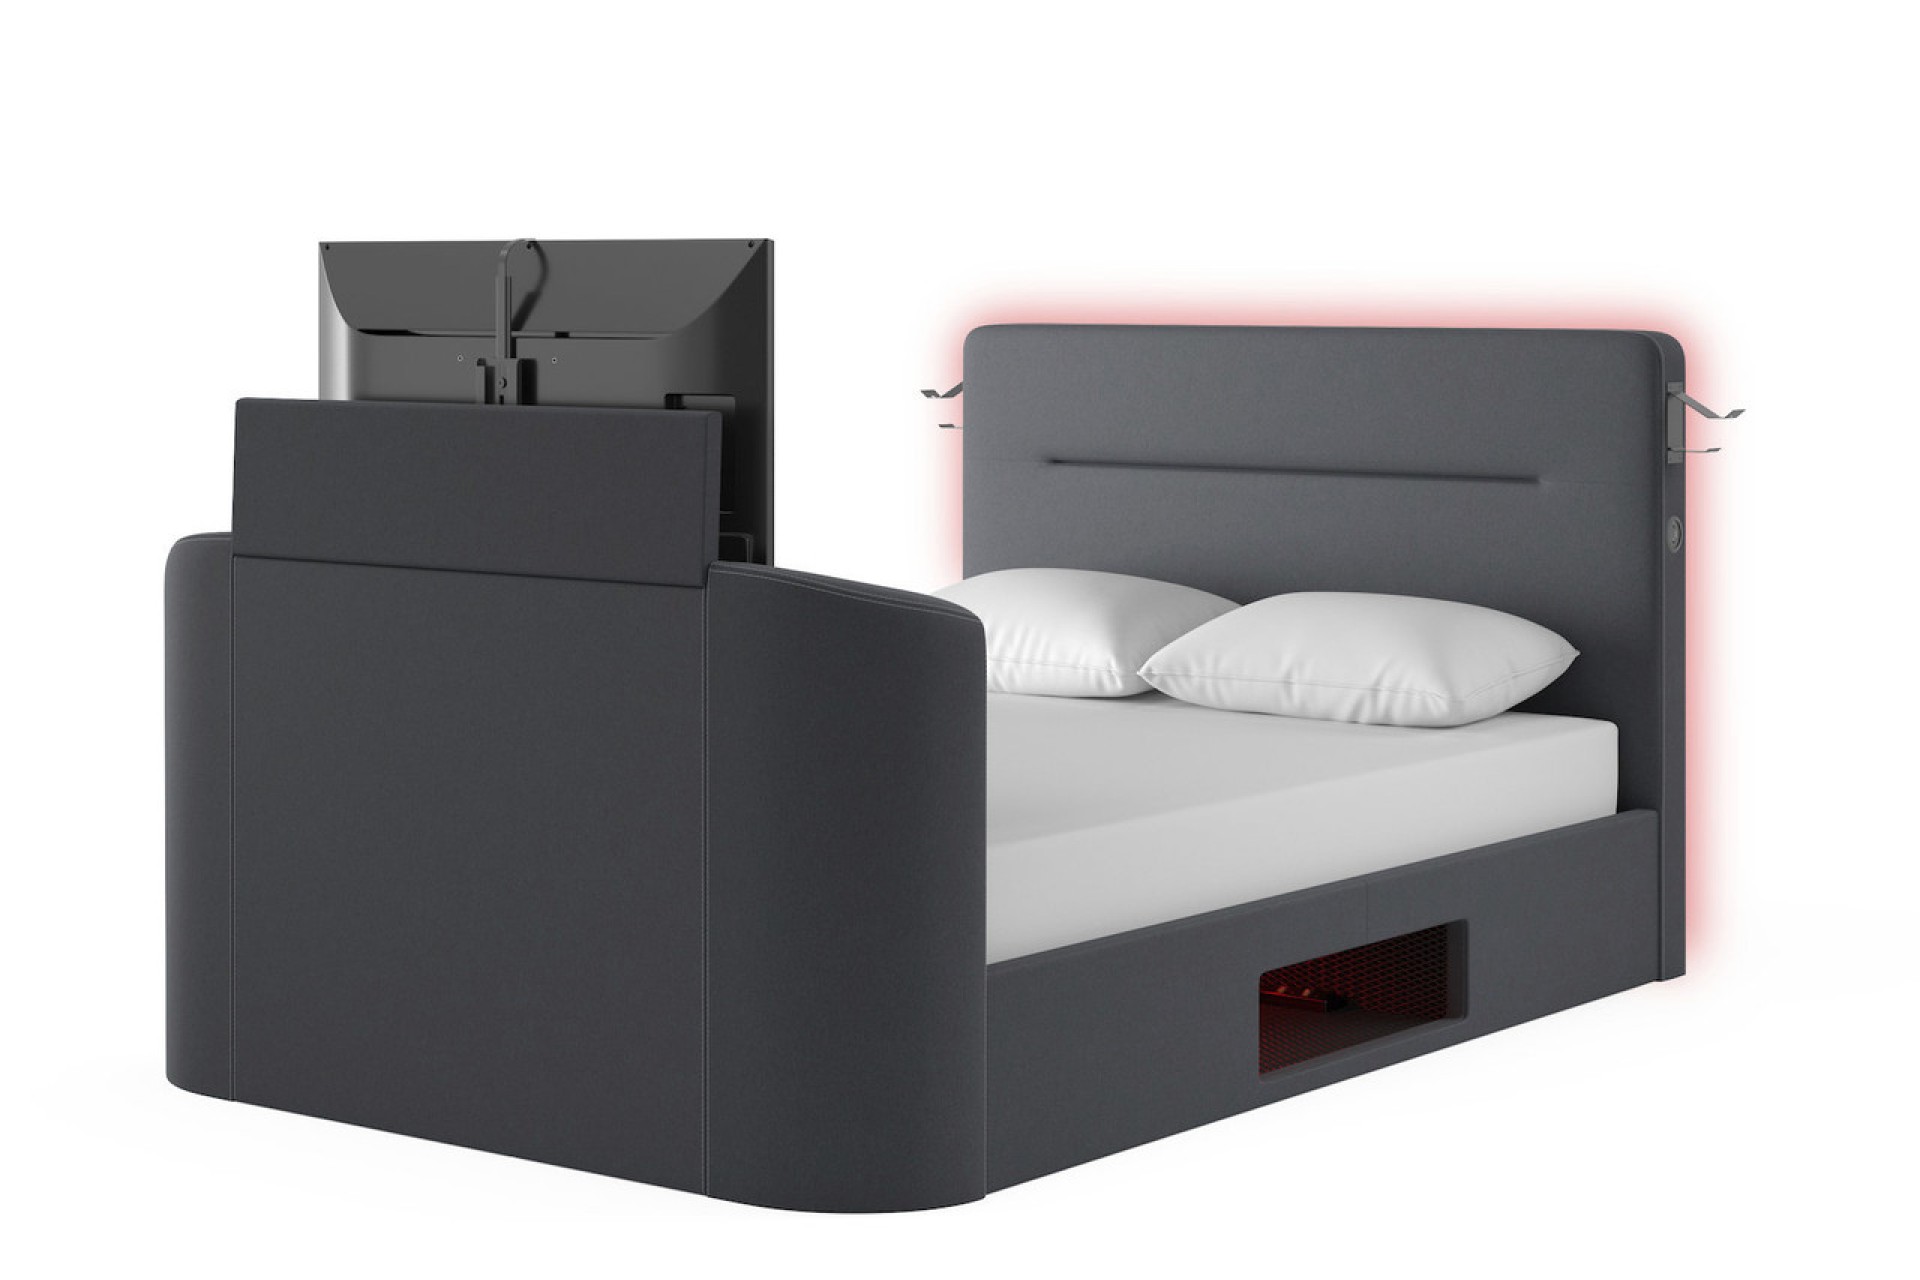 The re-charge gaming bed in charcoal grey with the TV in position for action